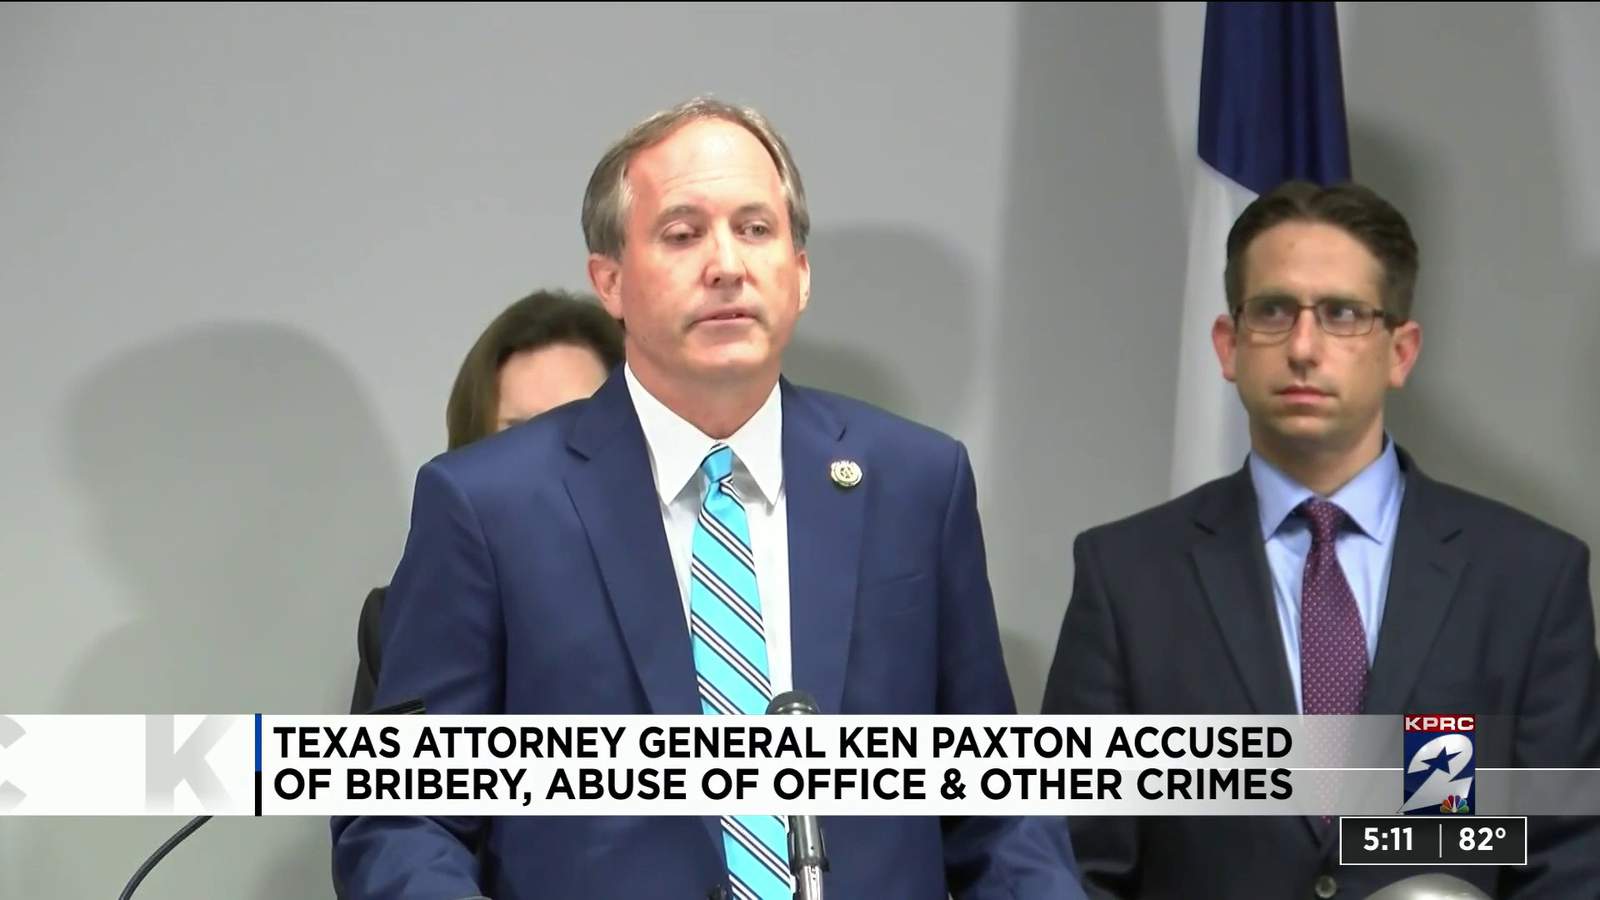 Texas AG Ken Paxton’s top aides want him investigated for bribery and other alleged crimes, report says